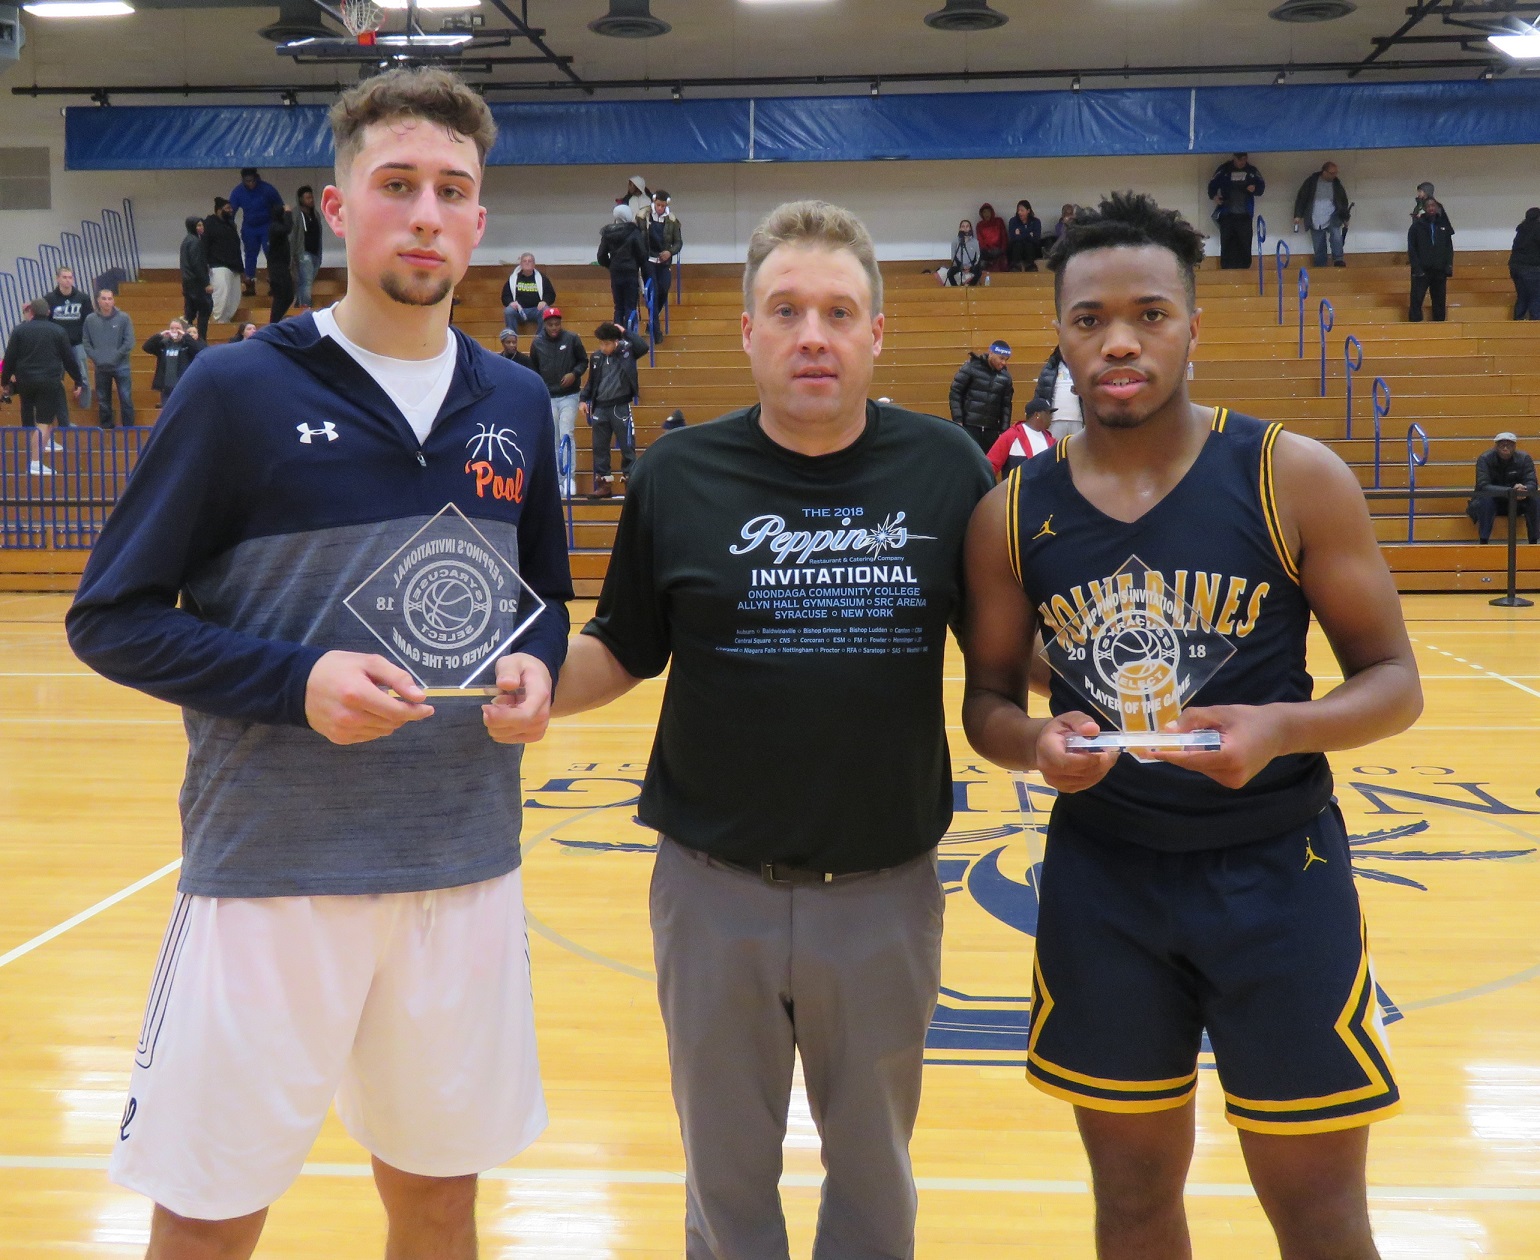 Niagara Falls' Josiah Harris (right) poses after winning Player of the Game honors after the Wolverines' 71-42 victory over Liverpool. Harris scored 11 points, including three 3-pointers. (Photo by David Yarger)